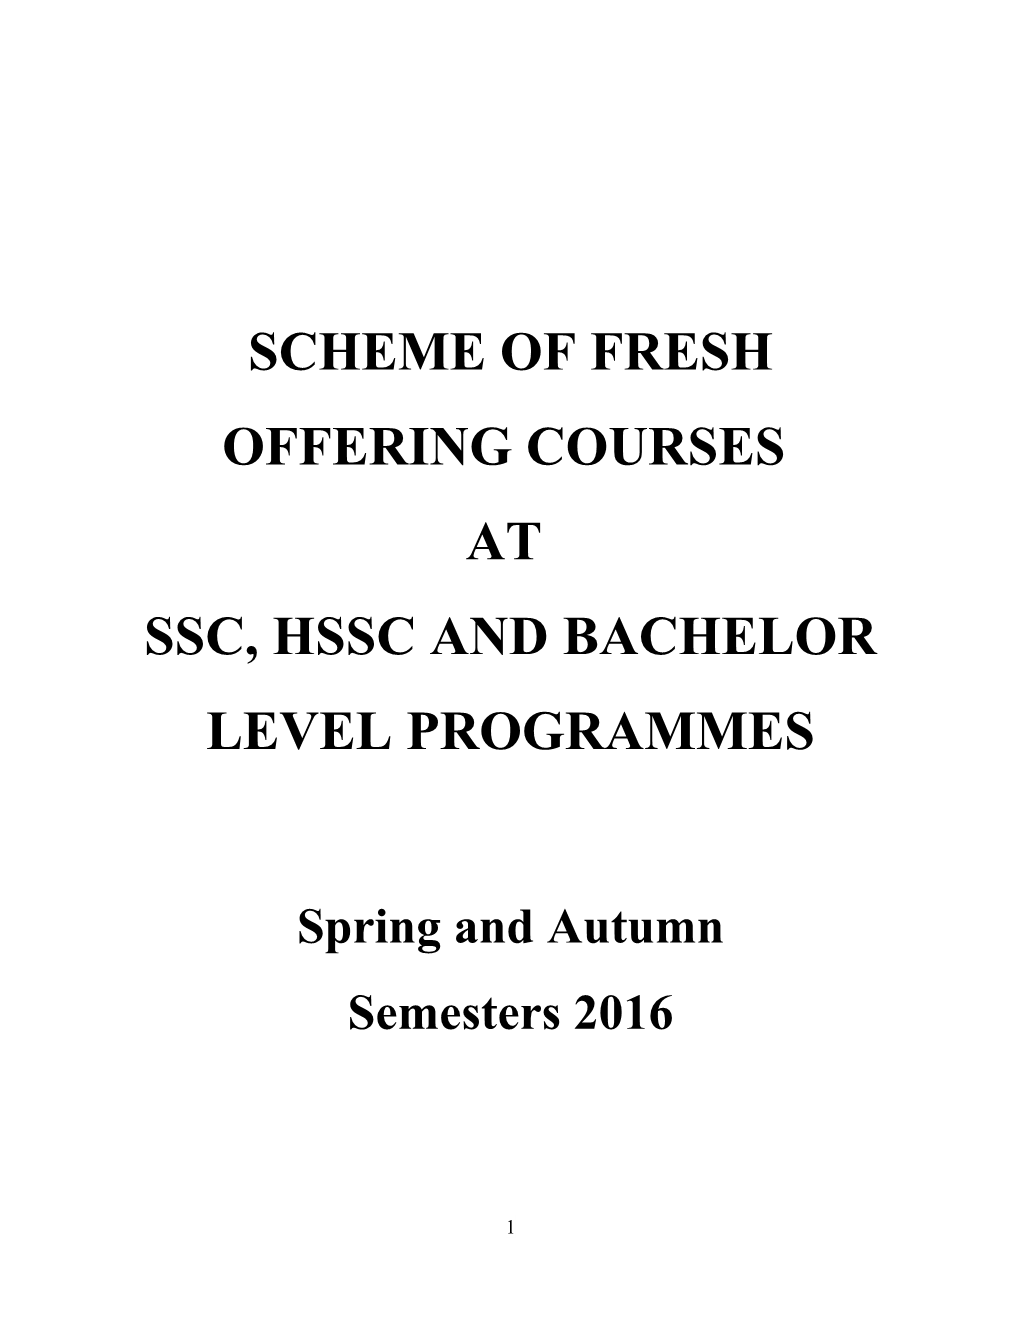 Scheme of Fresh Offering Courses